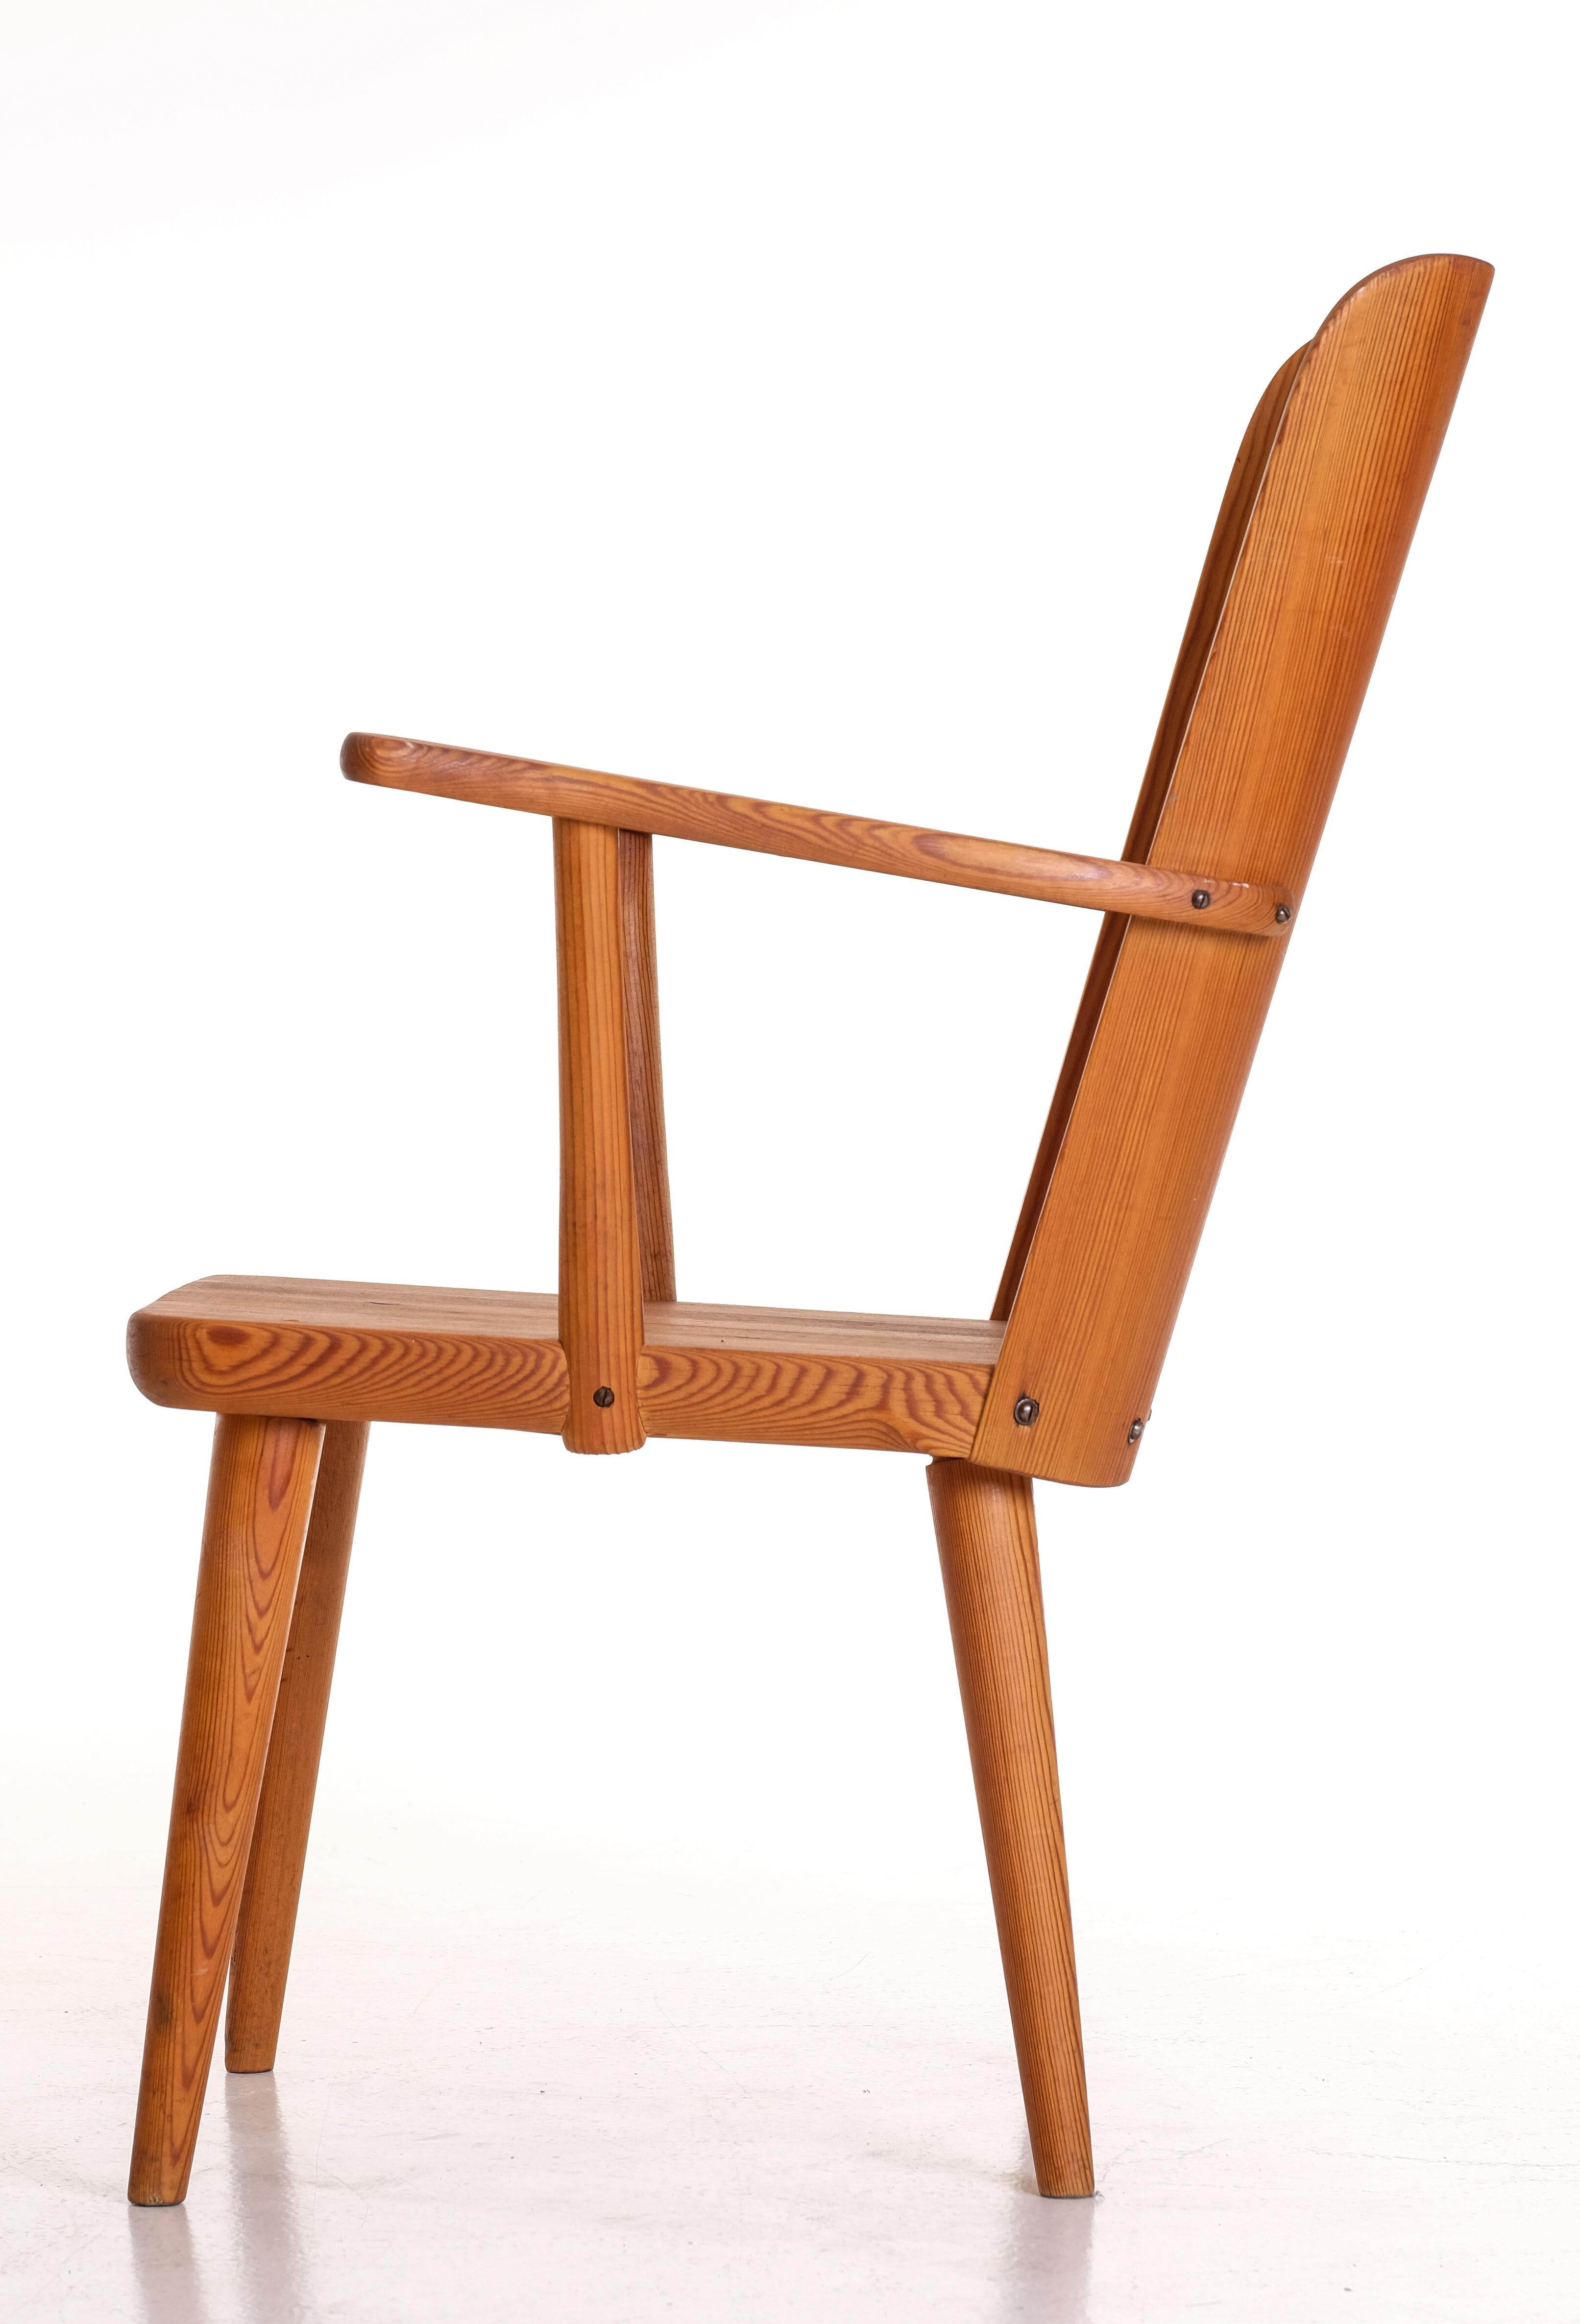 Pair of Swedish Pine Chairs by Göran Malmvall, 1950s For Sale 3